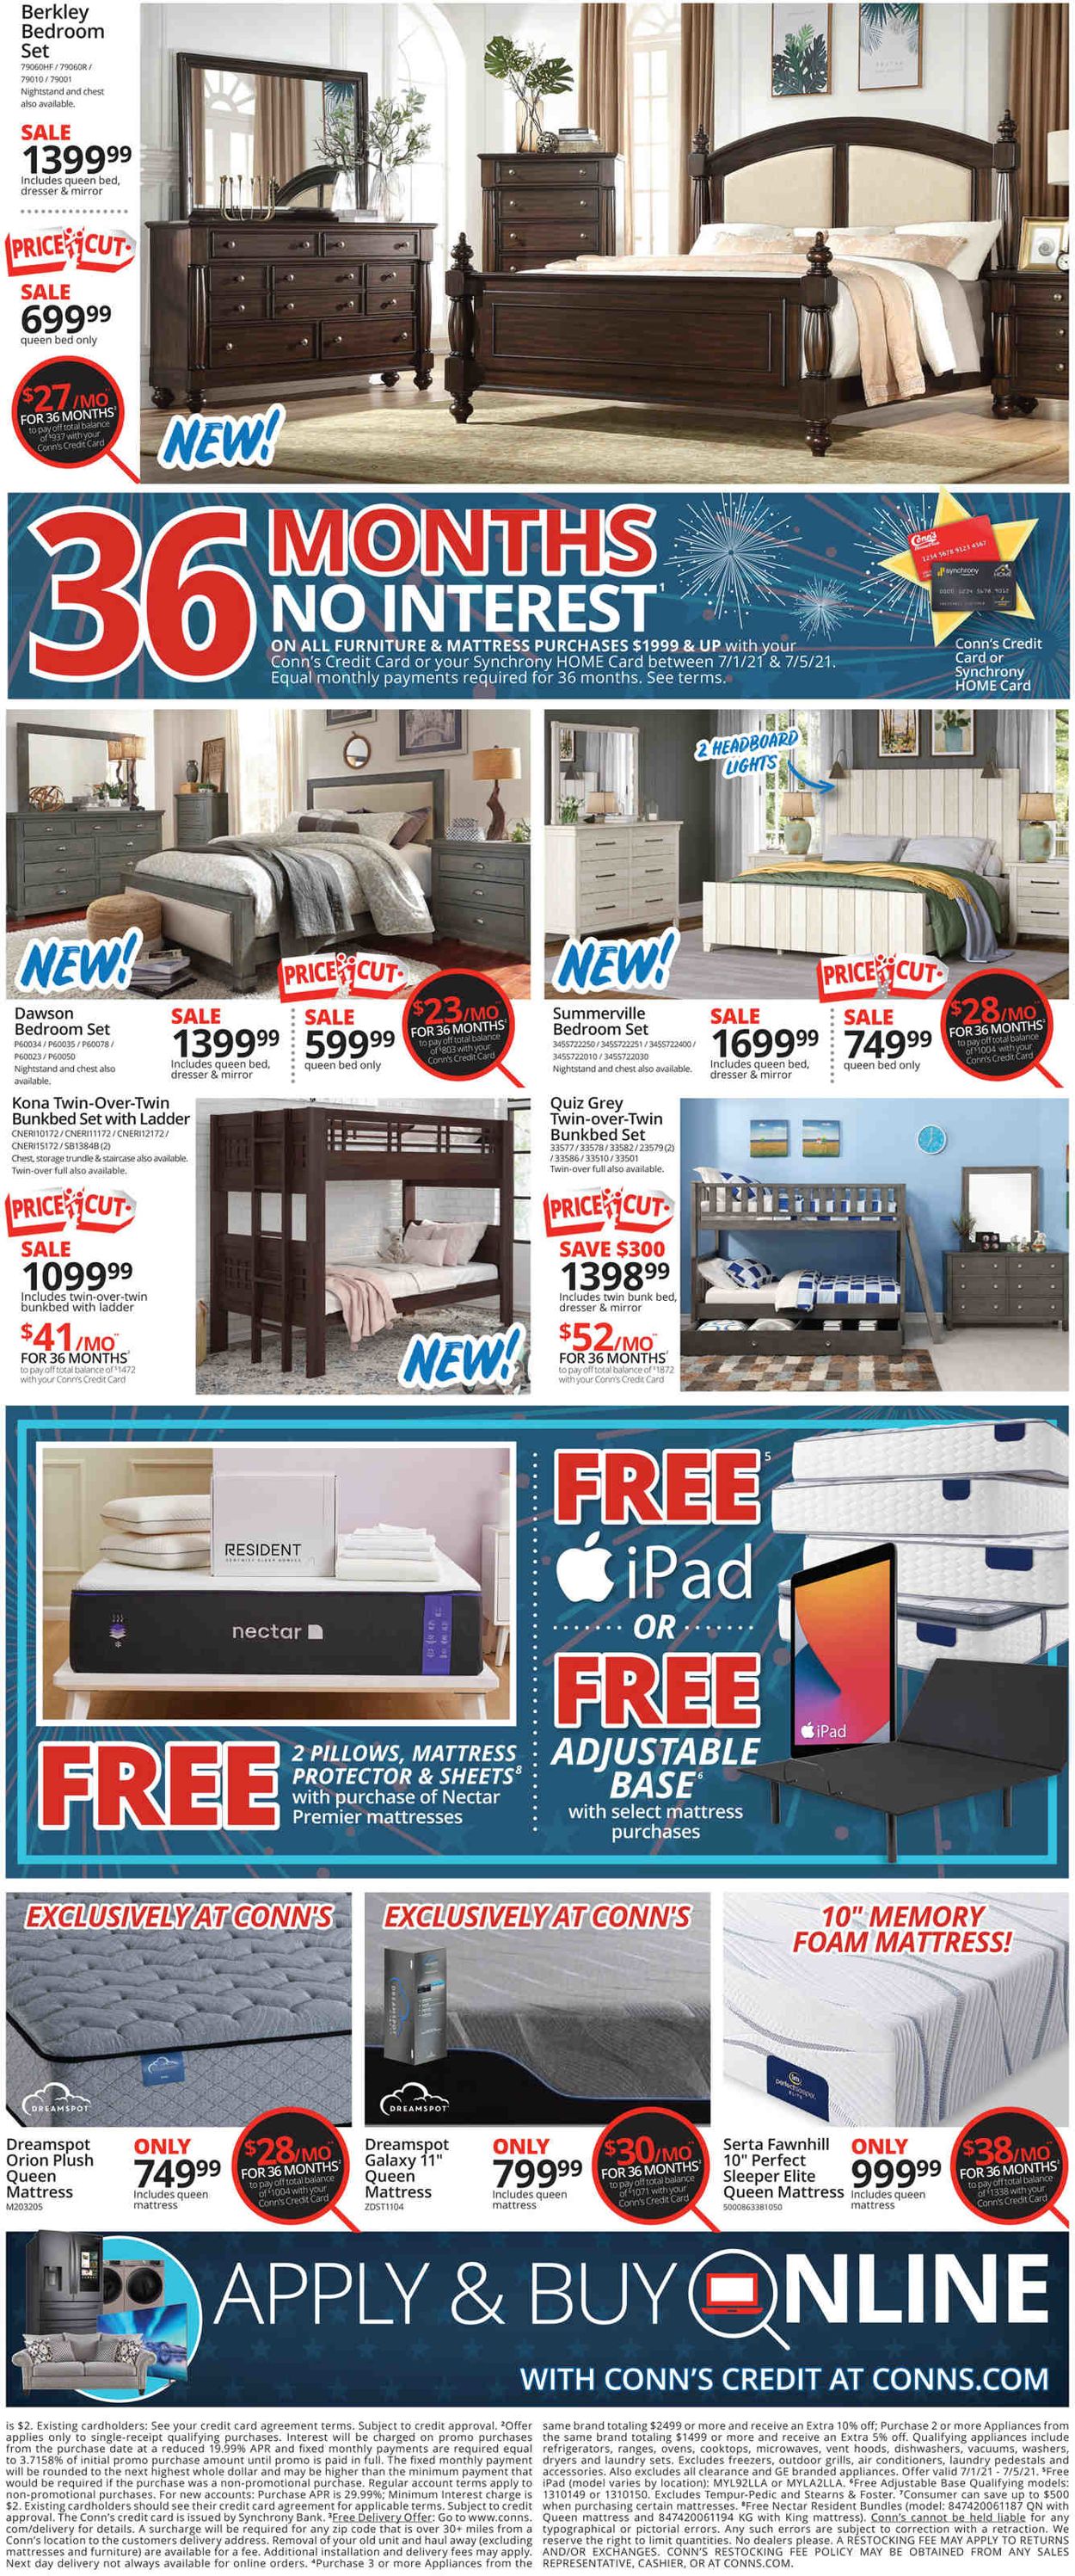 Conn's Home Plus Weekly Ad Circular - valid 07/01-07/05/2021 (Page 3)